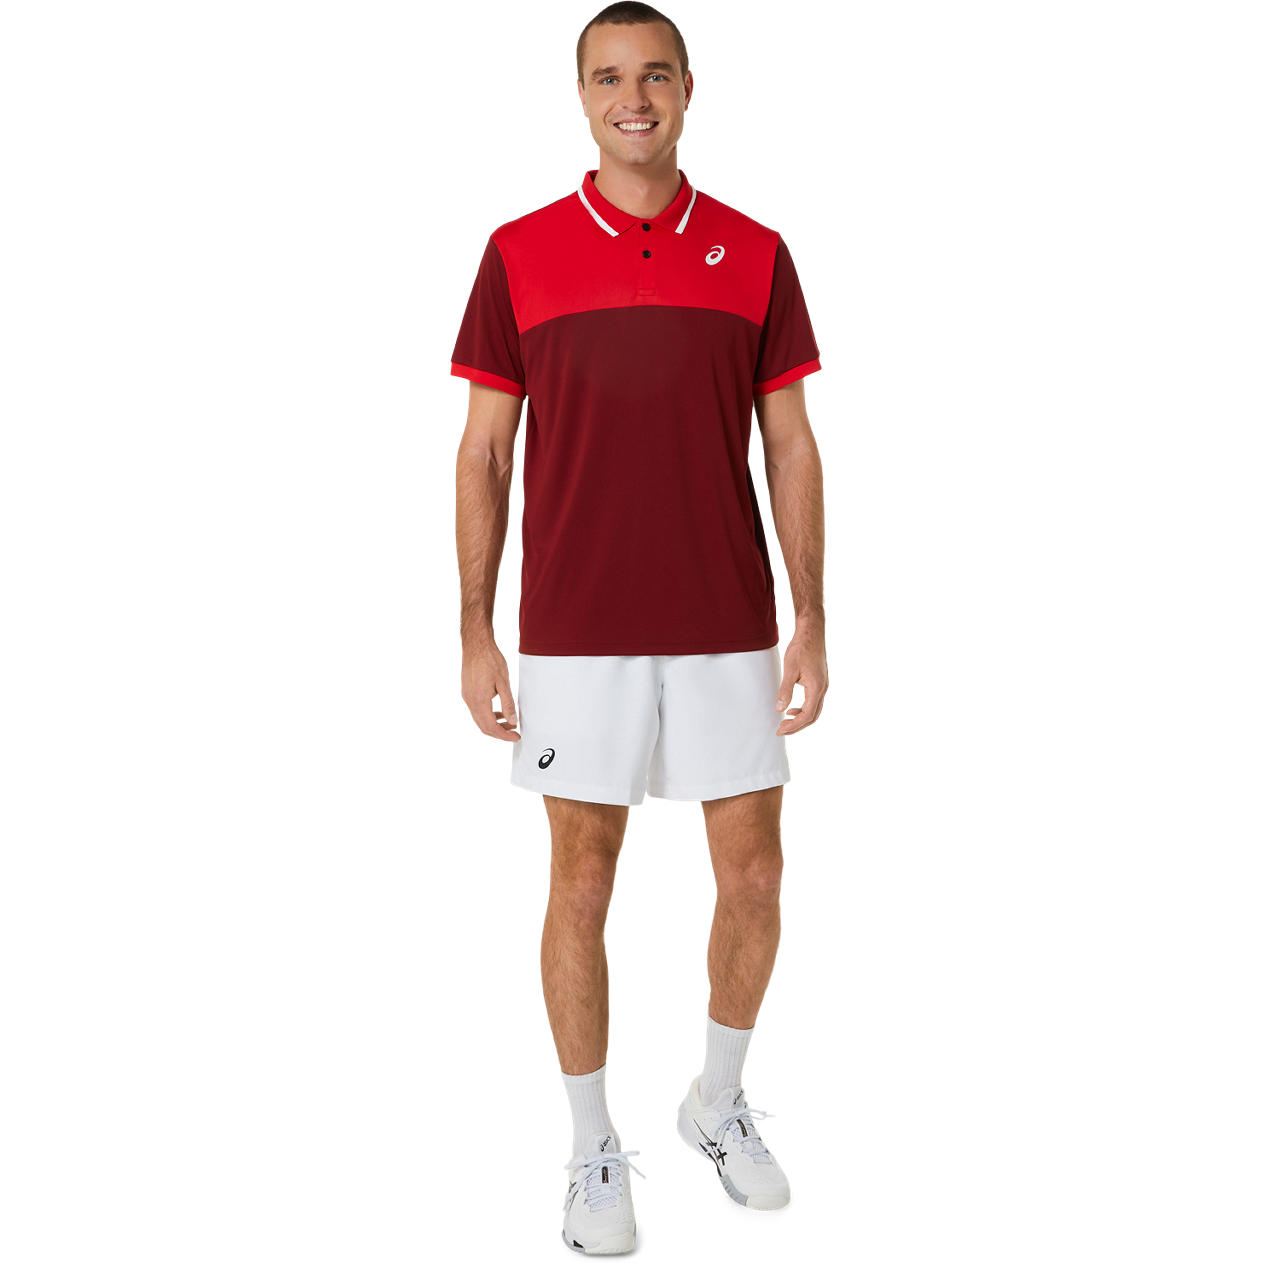 ASICS MEN COURT POLO SHIRT, BEET JUICE/CLASSIC RED, swatch